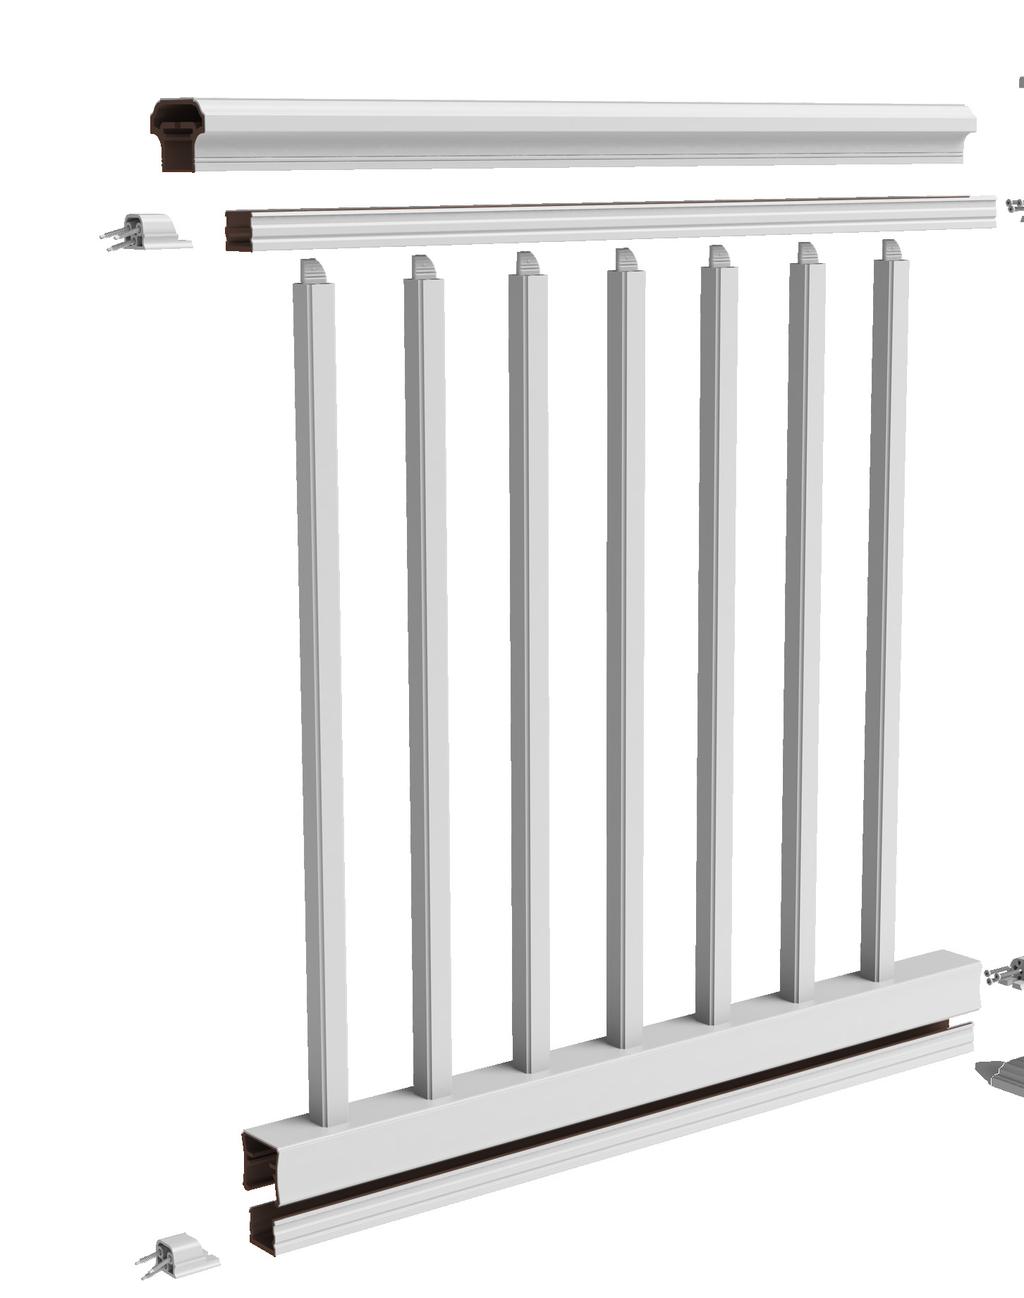 FEATURE SPOTLIGHT TOP RAIL 1 BRACKET (2 top & 2 bottom, with stainless steel screws) TOP BEAM BALUSTER ADAPTORS (Pre-installed in balusters) BALUSTERS DURABILITY AND FINISH An industry first, ultra